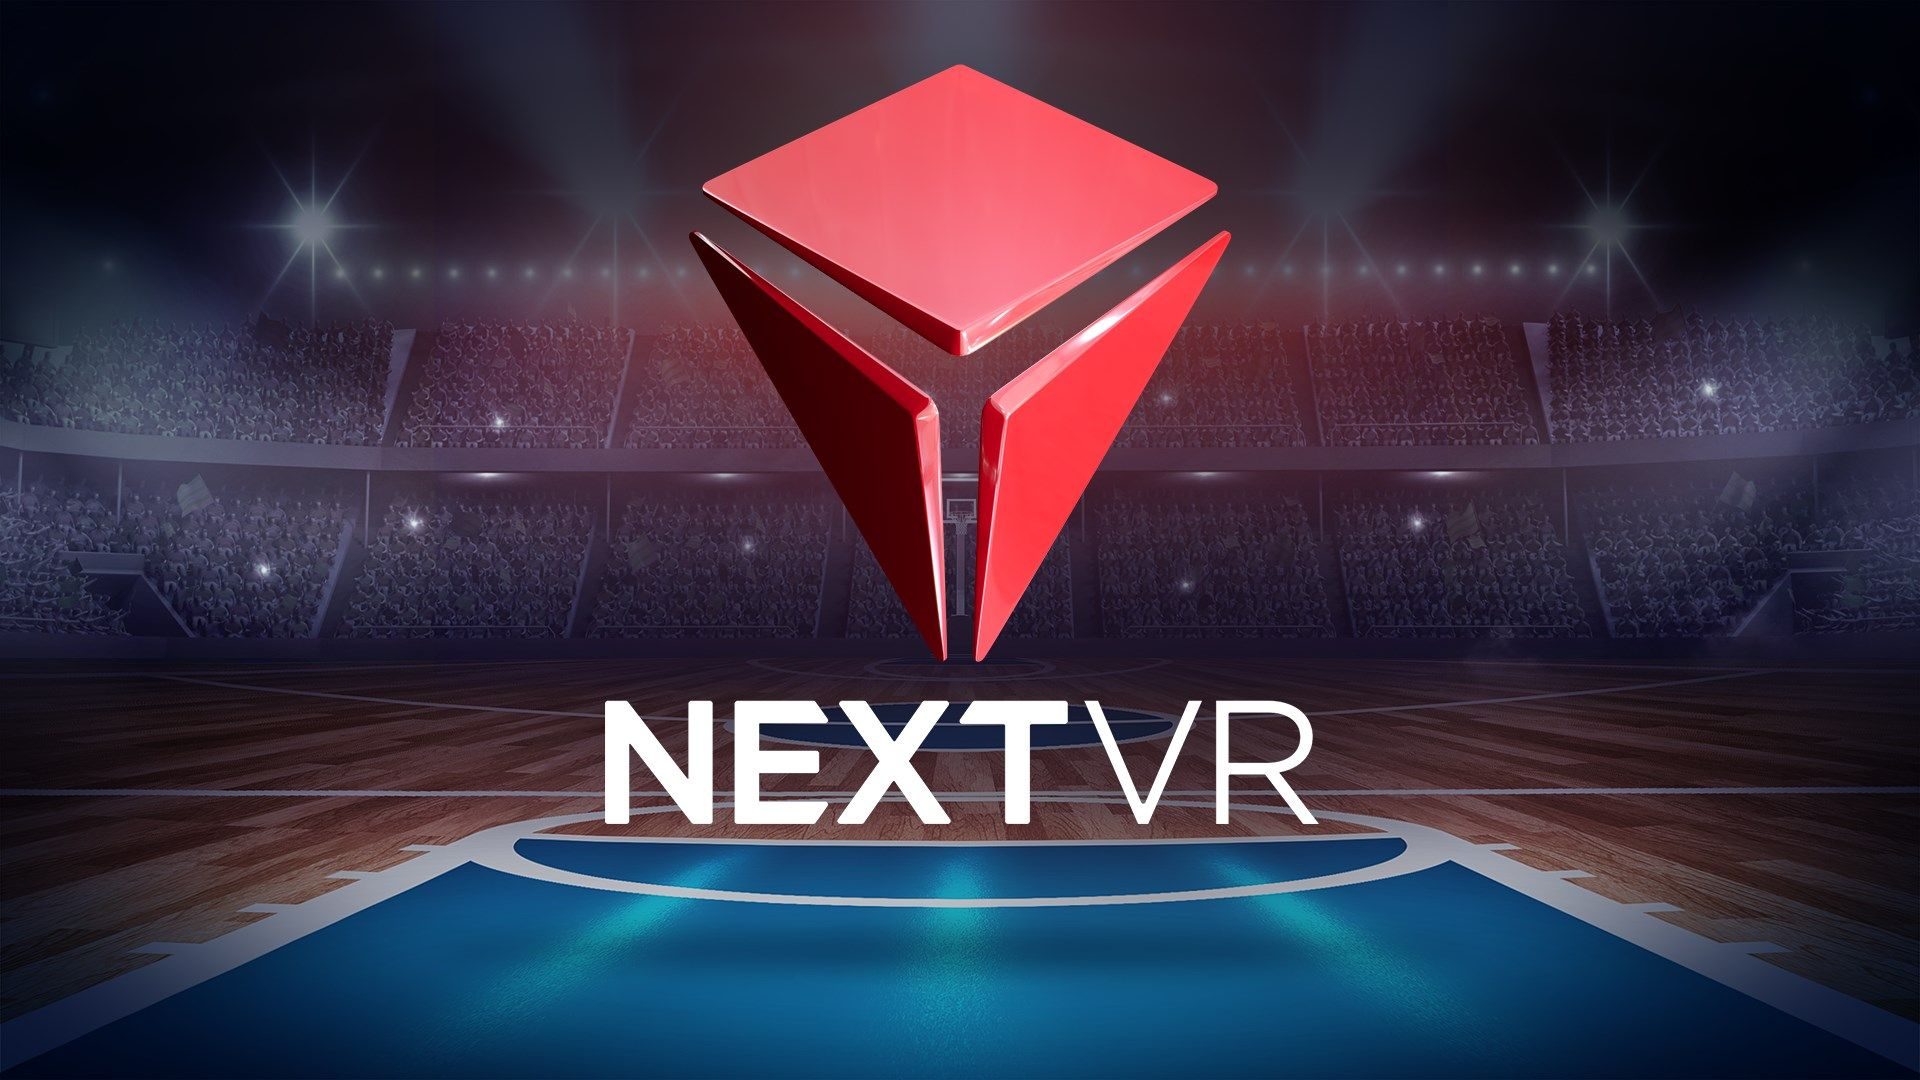 Apple acquires NextVR, a company focused on virtual reality video streaming